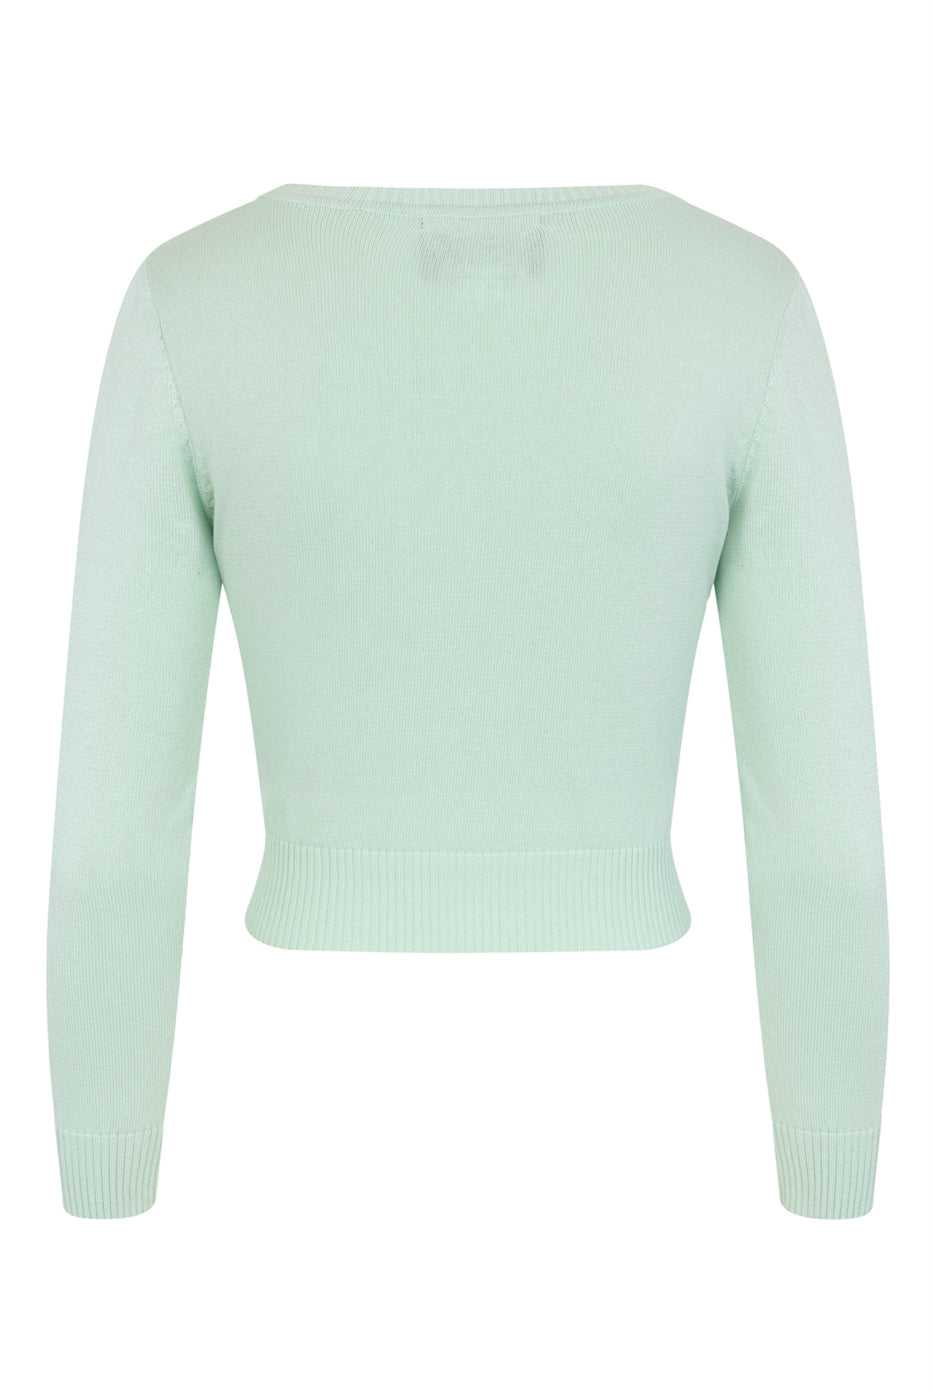 Back view of a mint green fine knit cardigan with long sleeves. The back is plain.